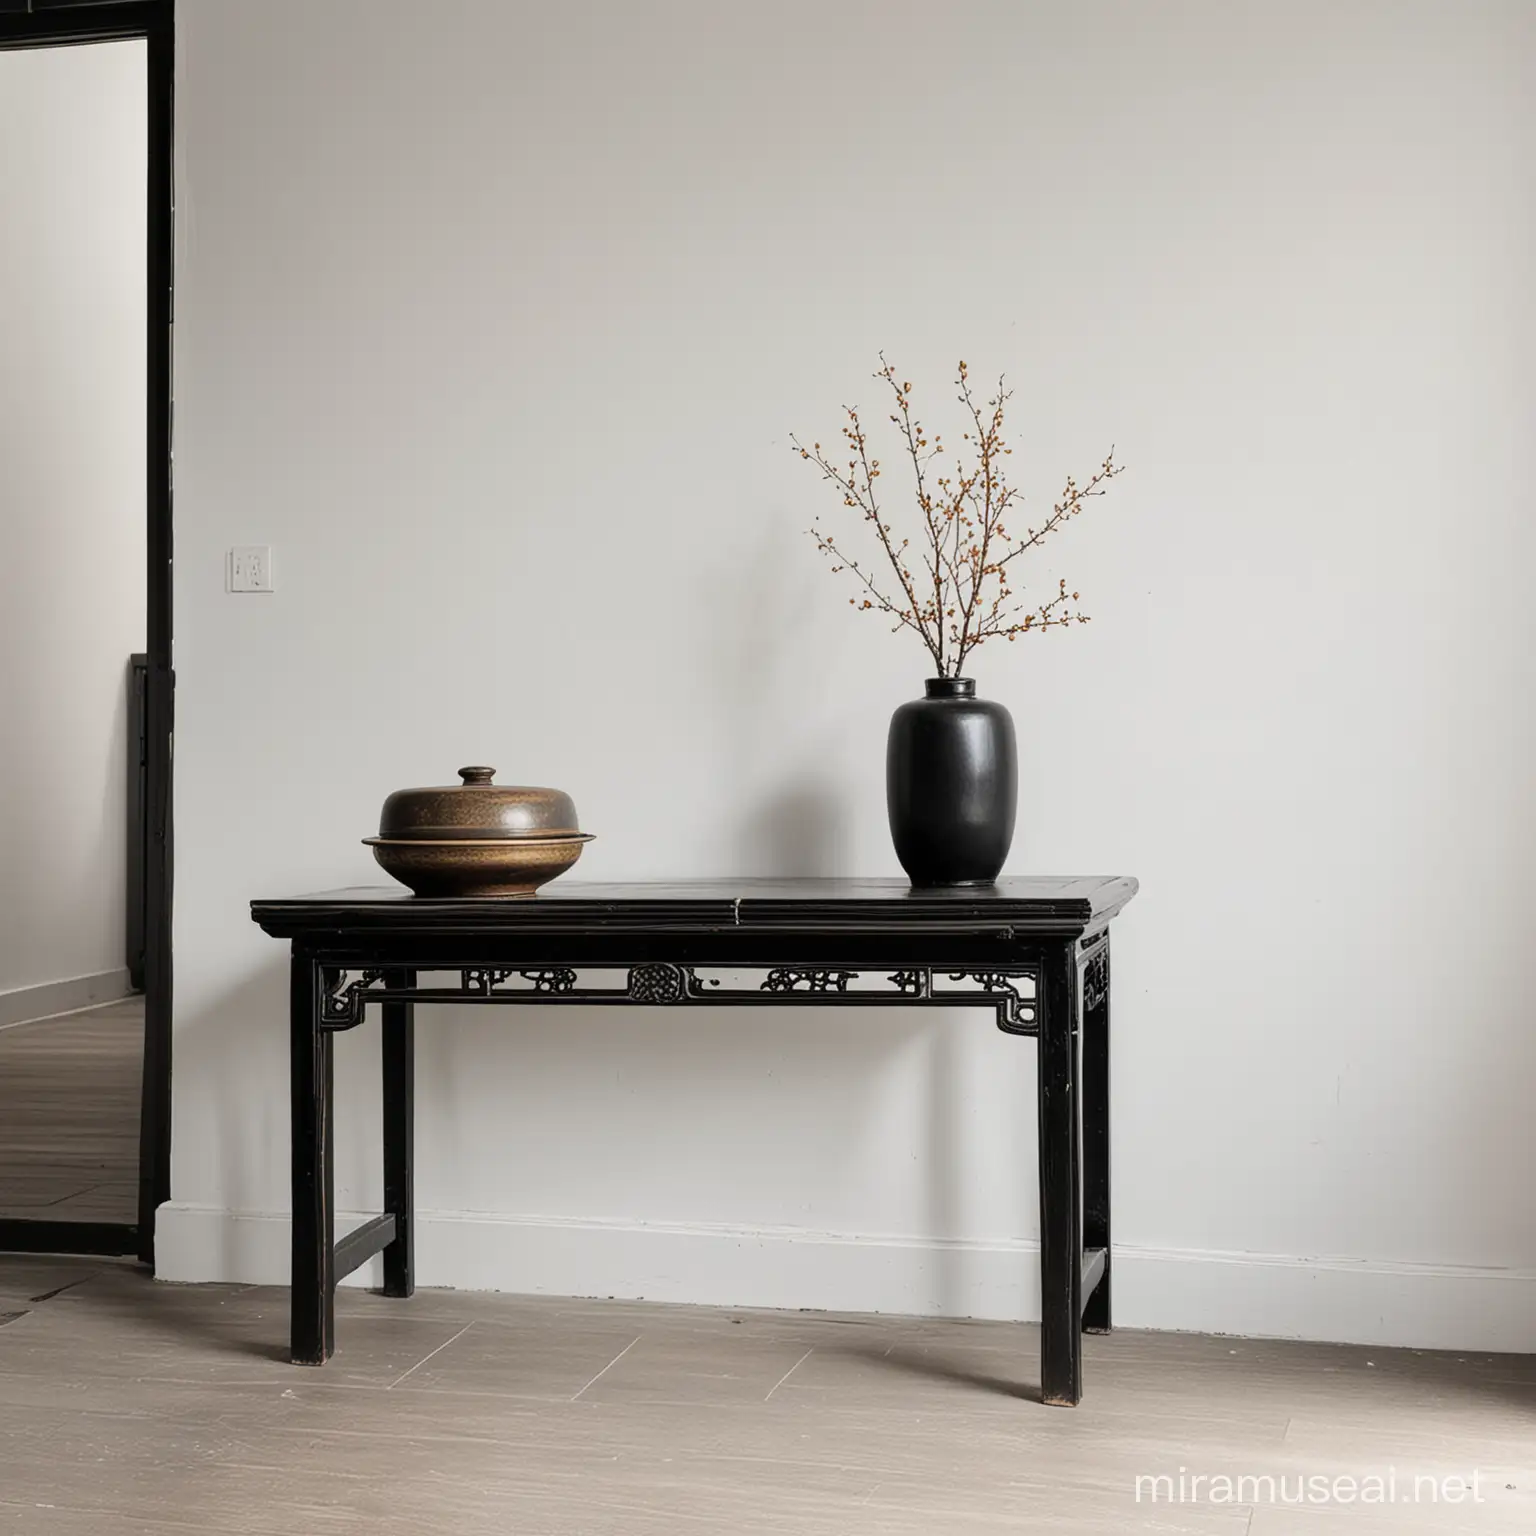 a black Chinese table in a hall against a white wall